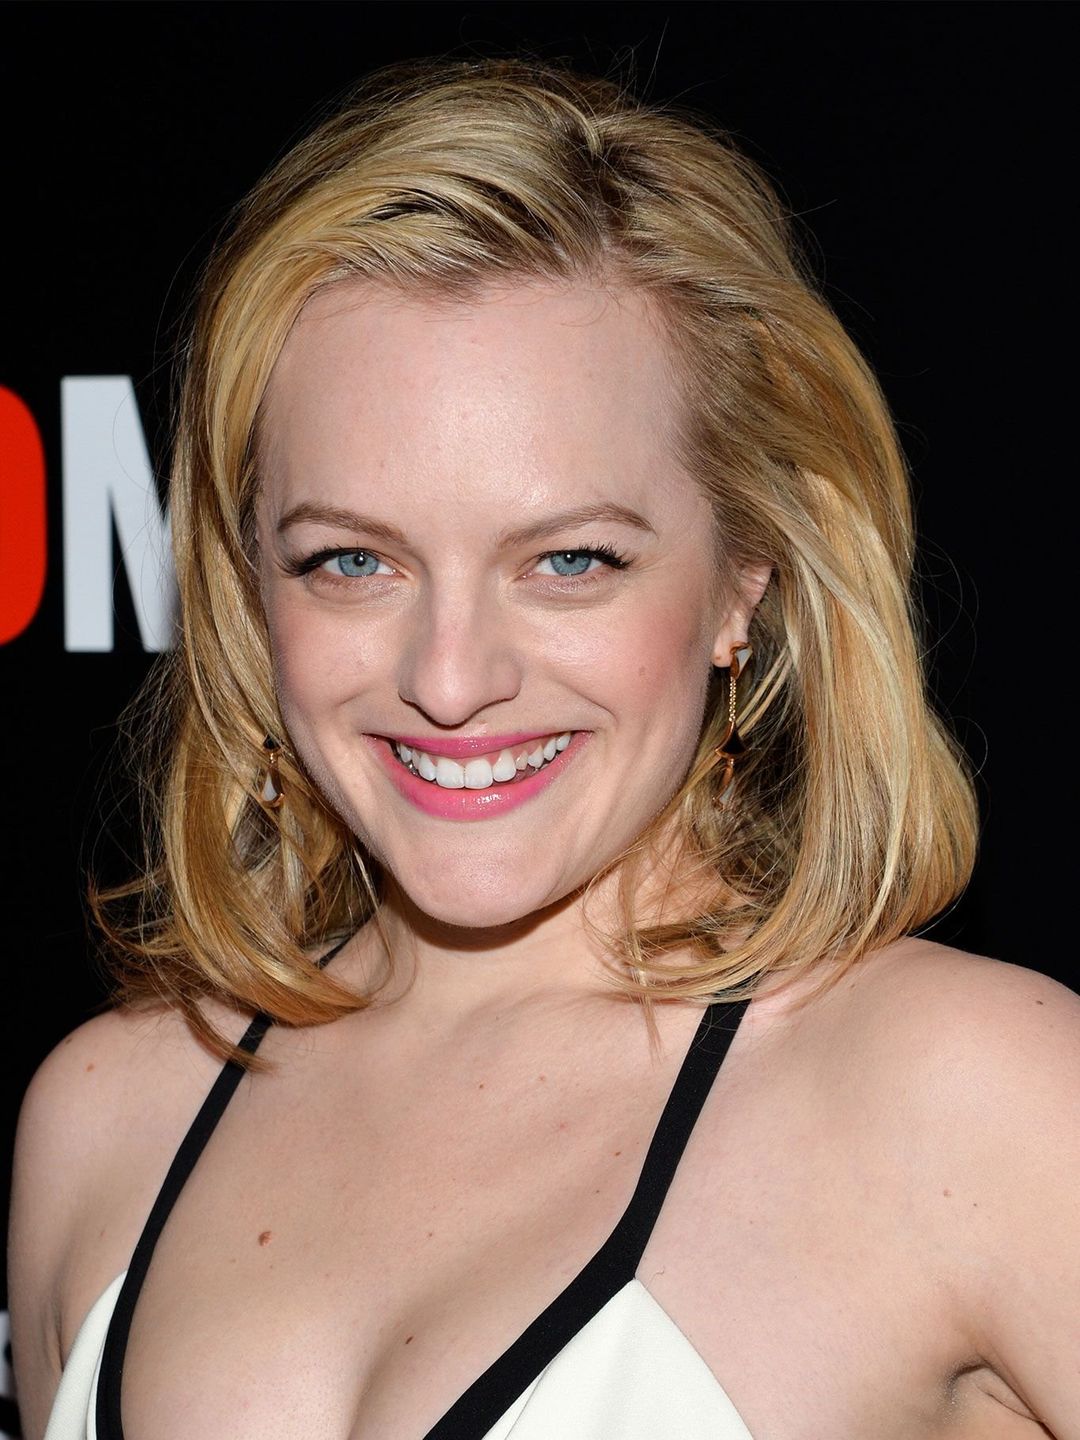 Elisabeth Moss in her youth